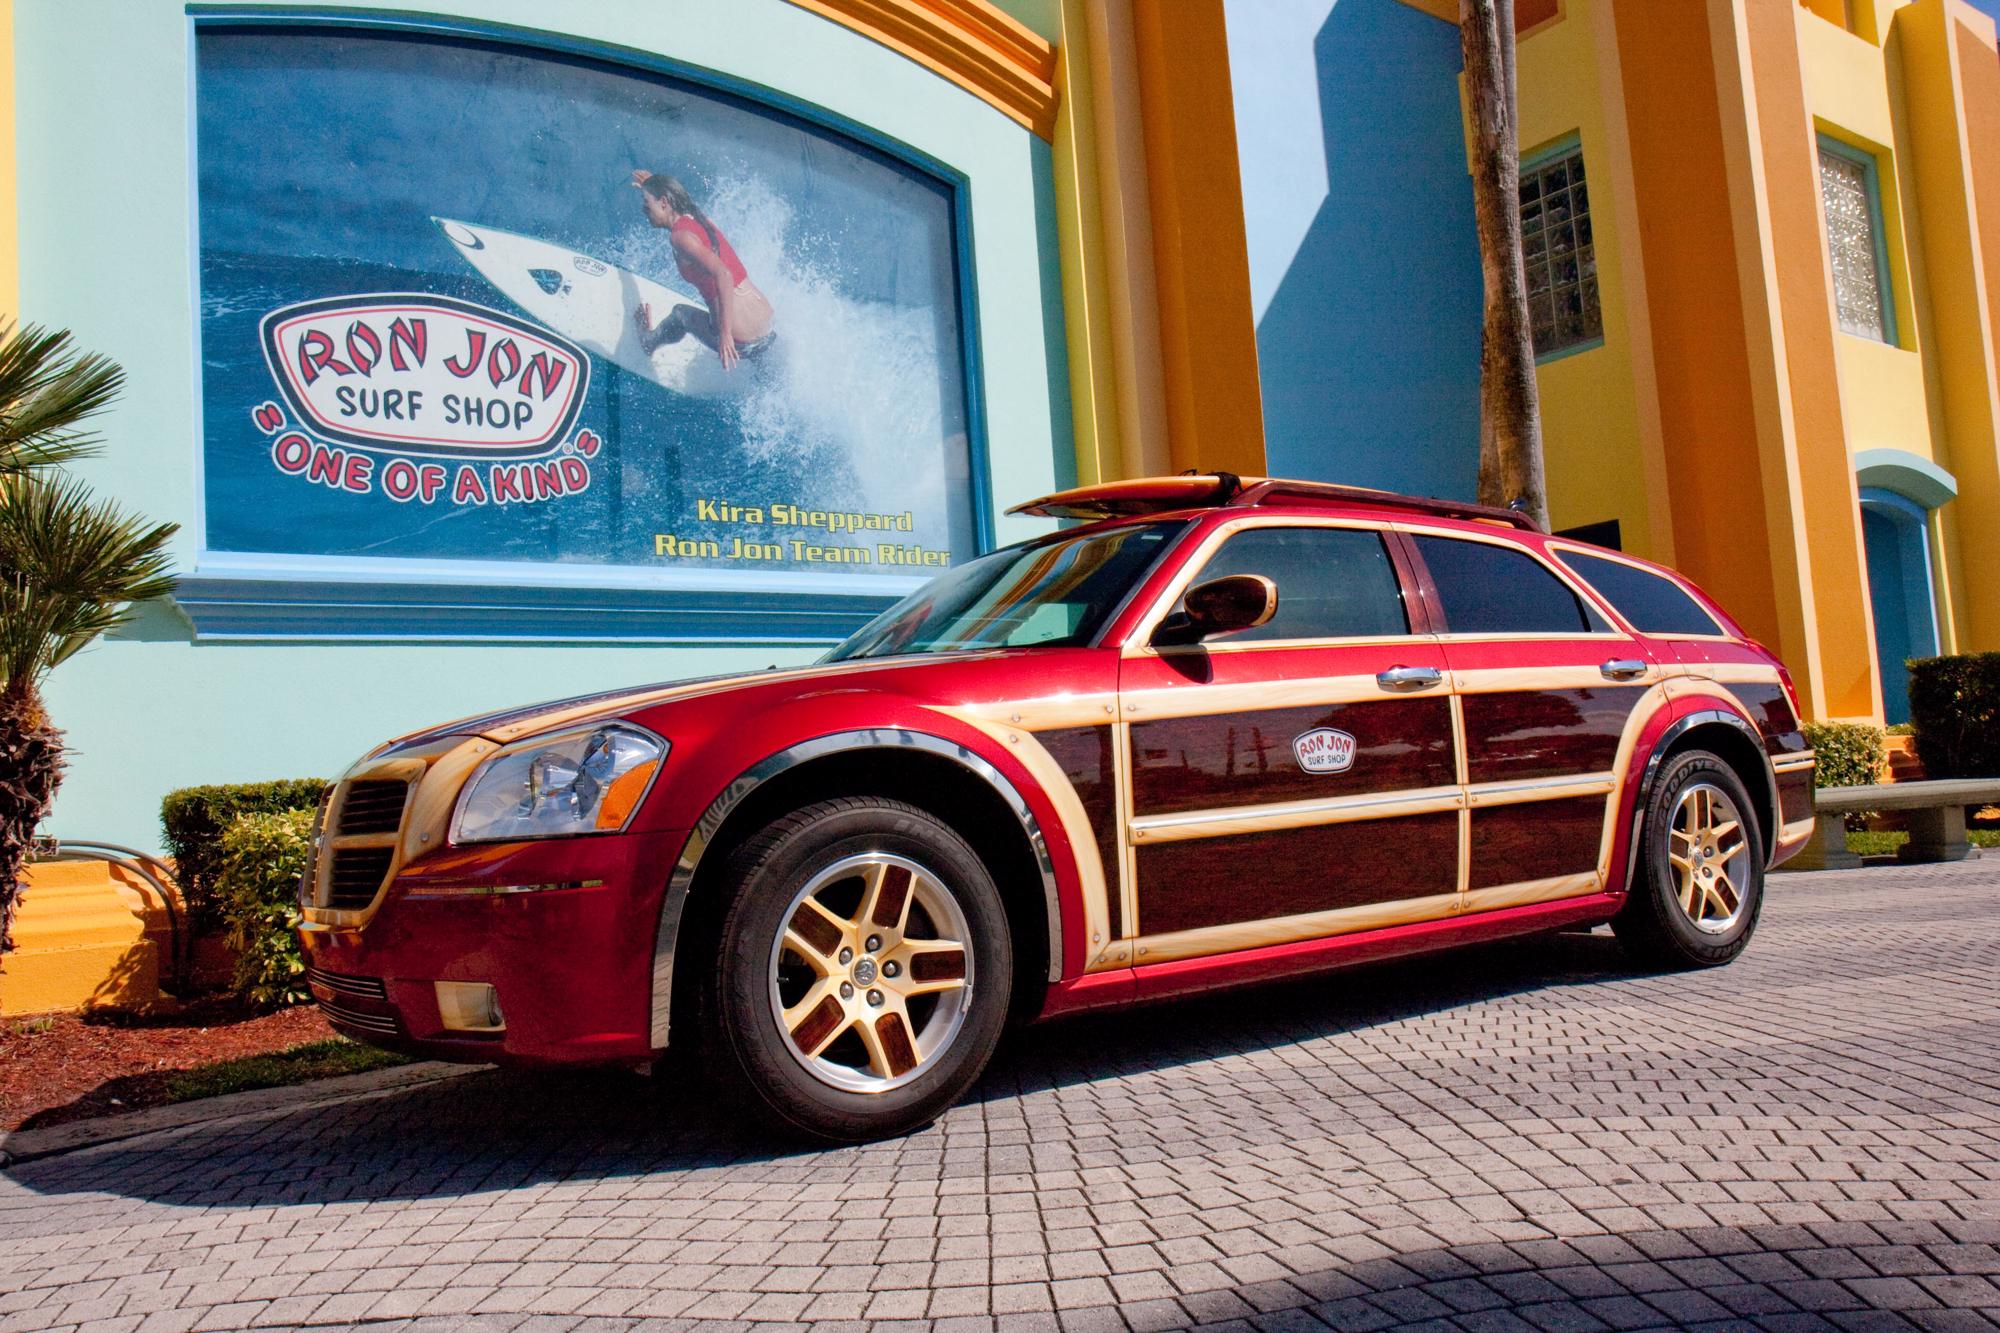 Photo of Woody Magnum car in front of the Ron Jon Cocoa Beach